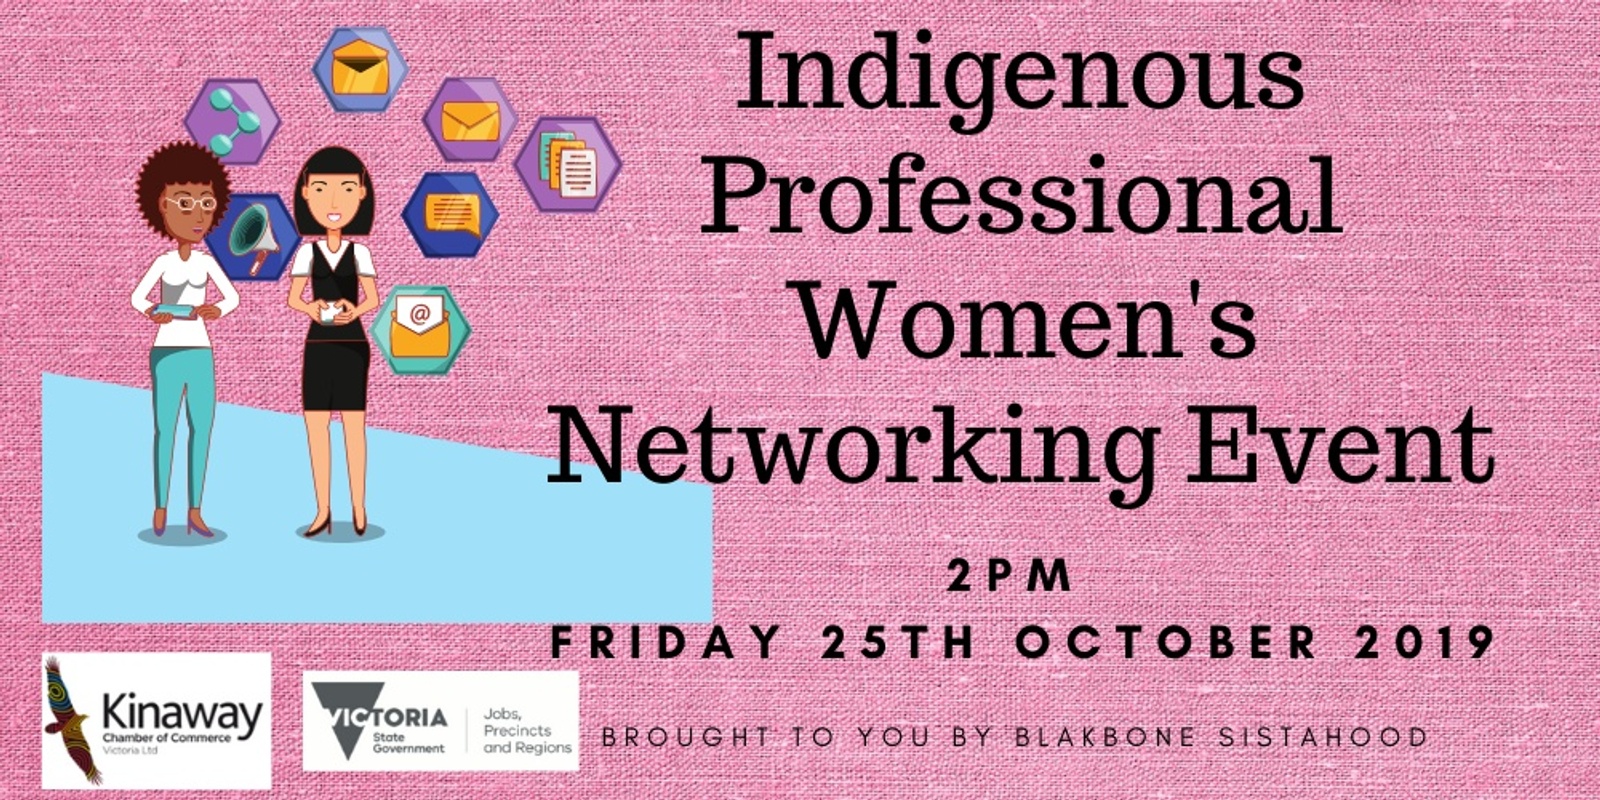 Banner image for Indigenous Professional Women's Networking Event